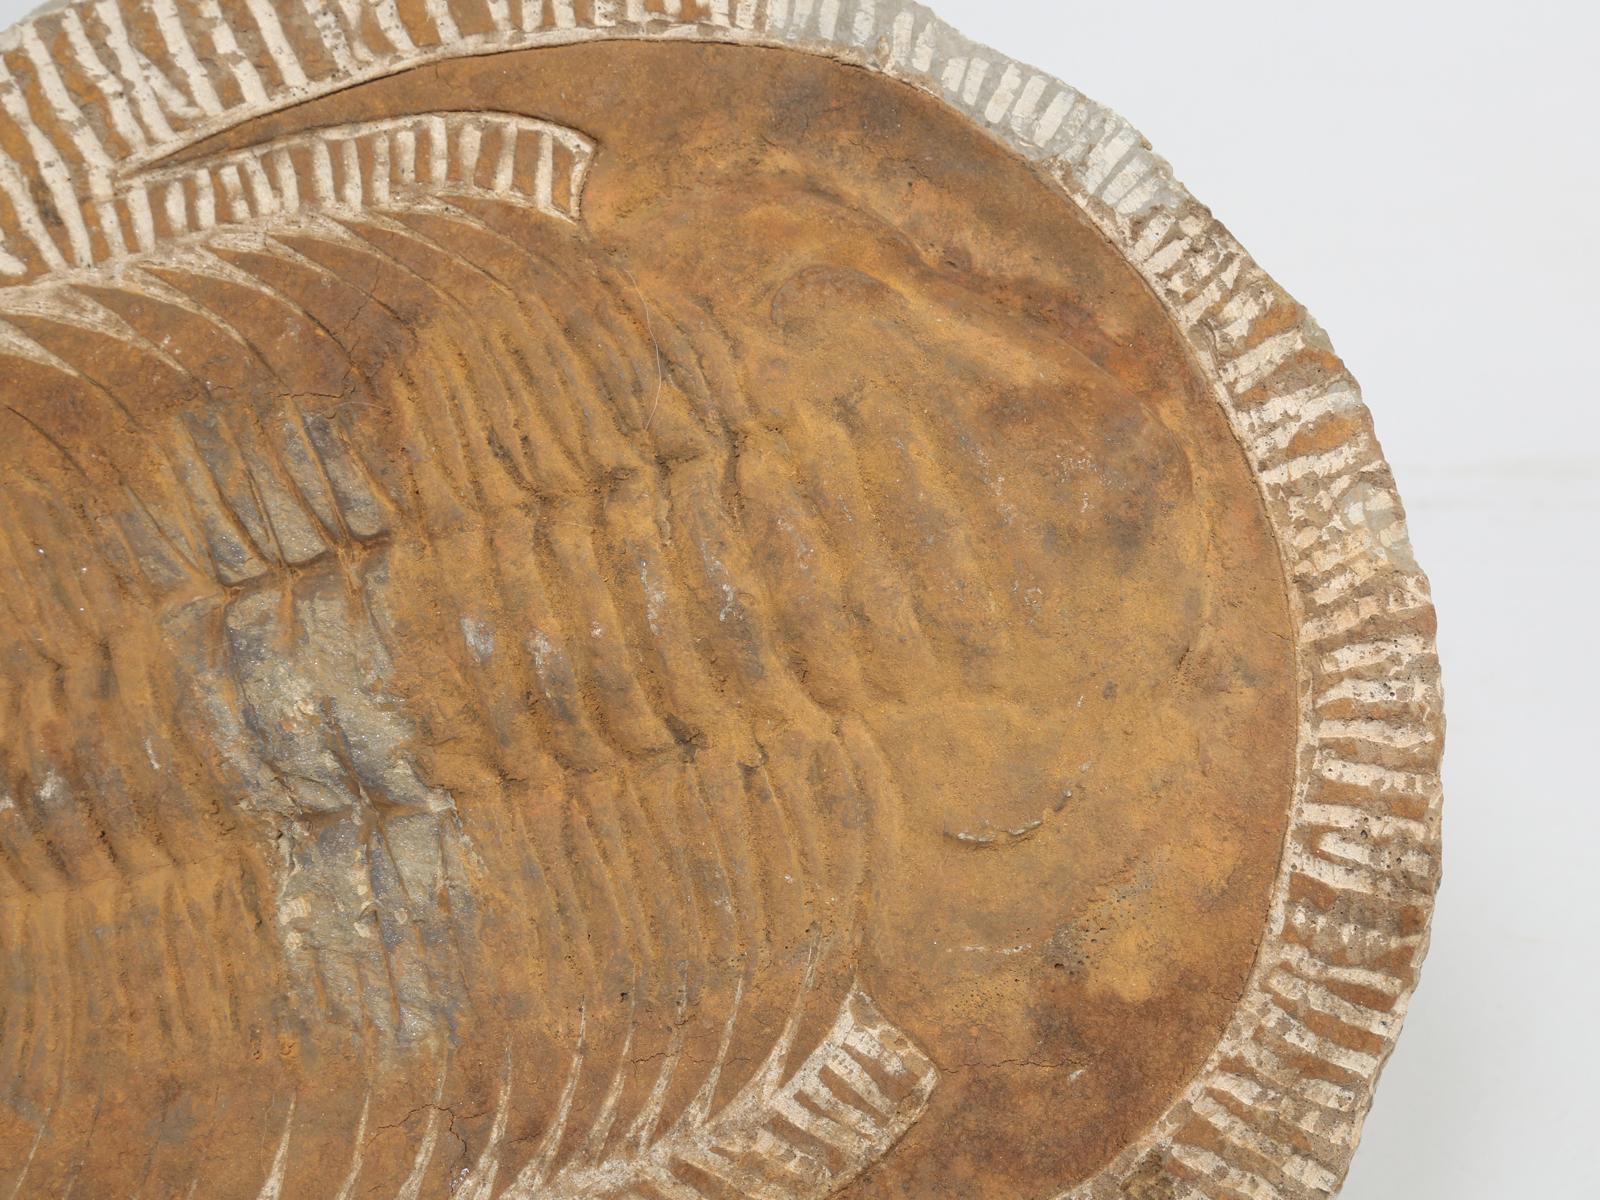 Trilobites, existing today only in fossil form, was an early arthropod. When life exploded into animal form marking the beginning of the Paleozoic, it was this prolific arthropod that became the signpost for the era. They came into existence